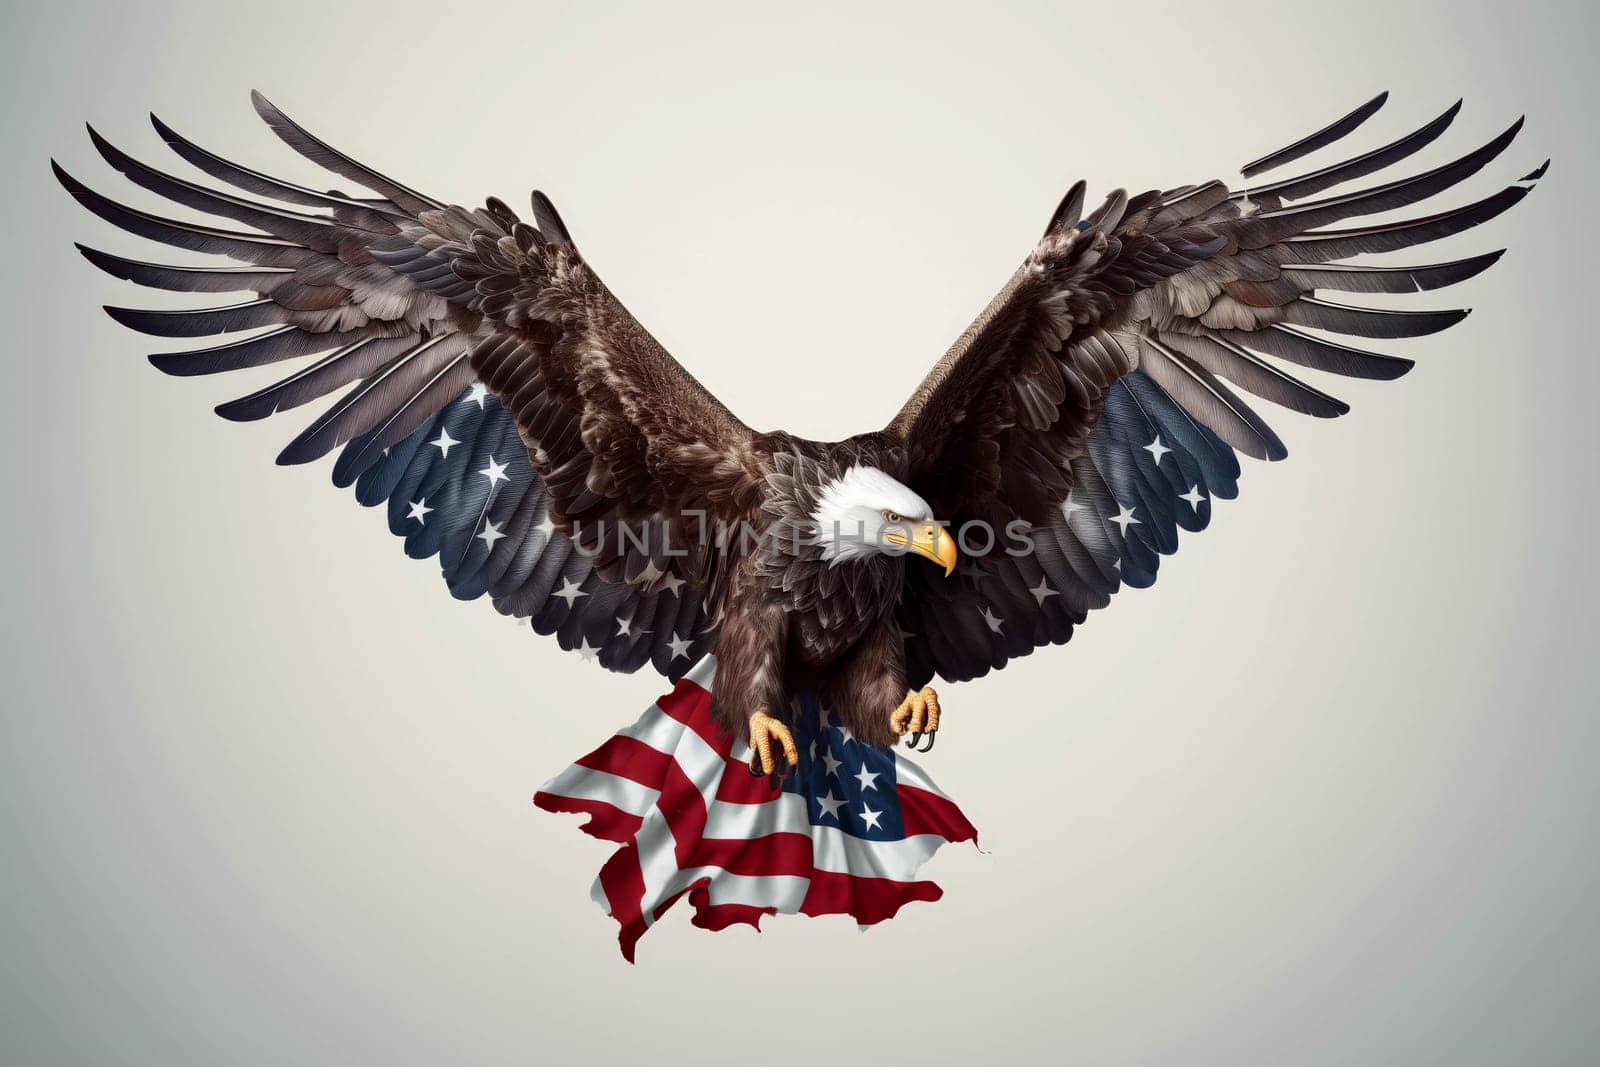 A large eagle with a red, white, and blue American flag in its talons. The eagle is soaring in the sky, representing freedom and strength